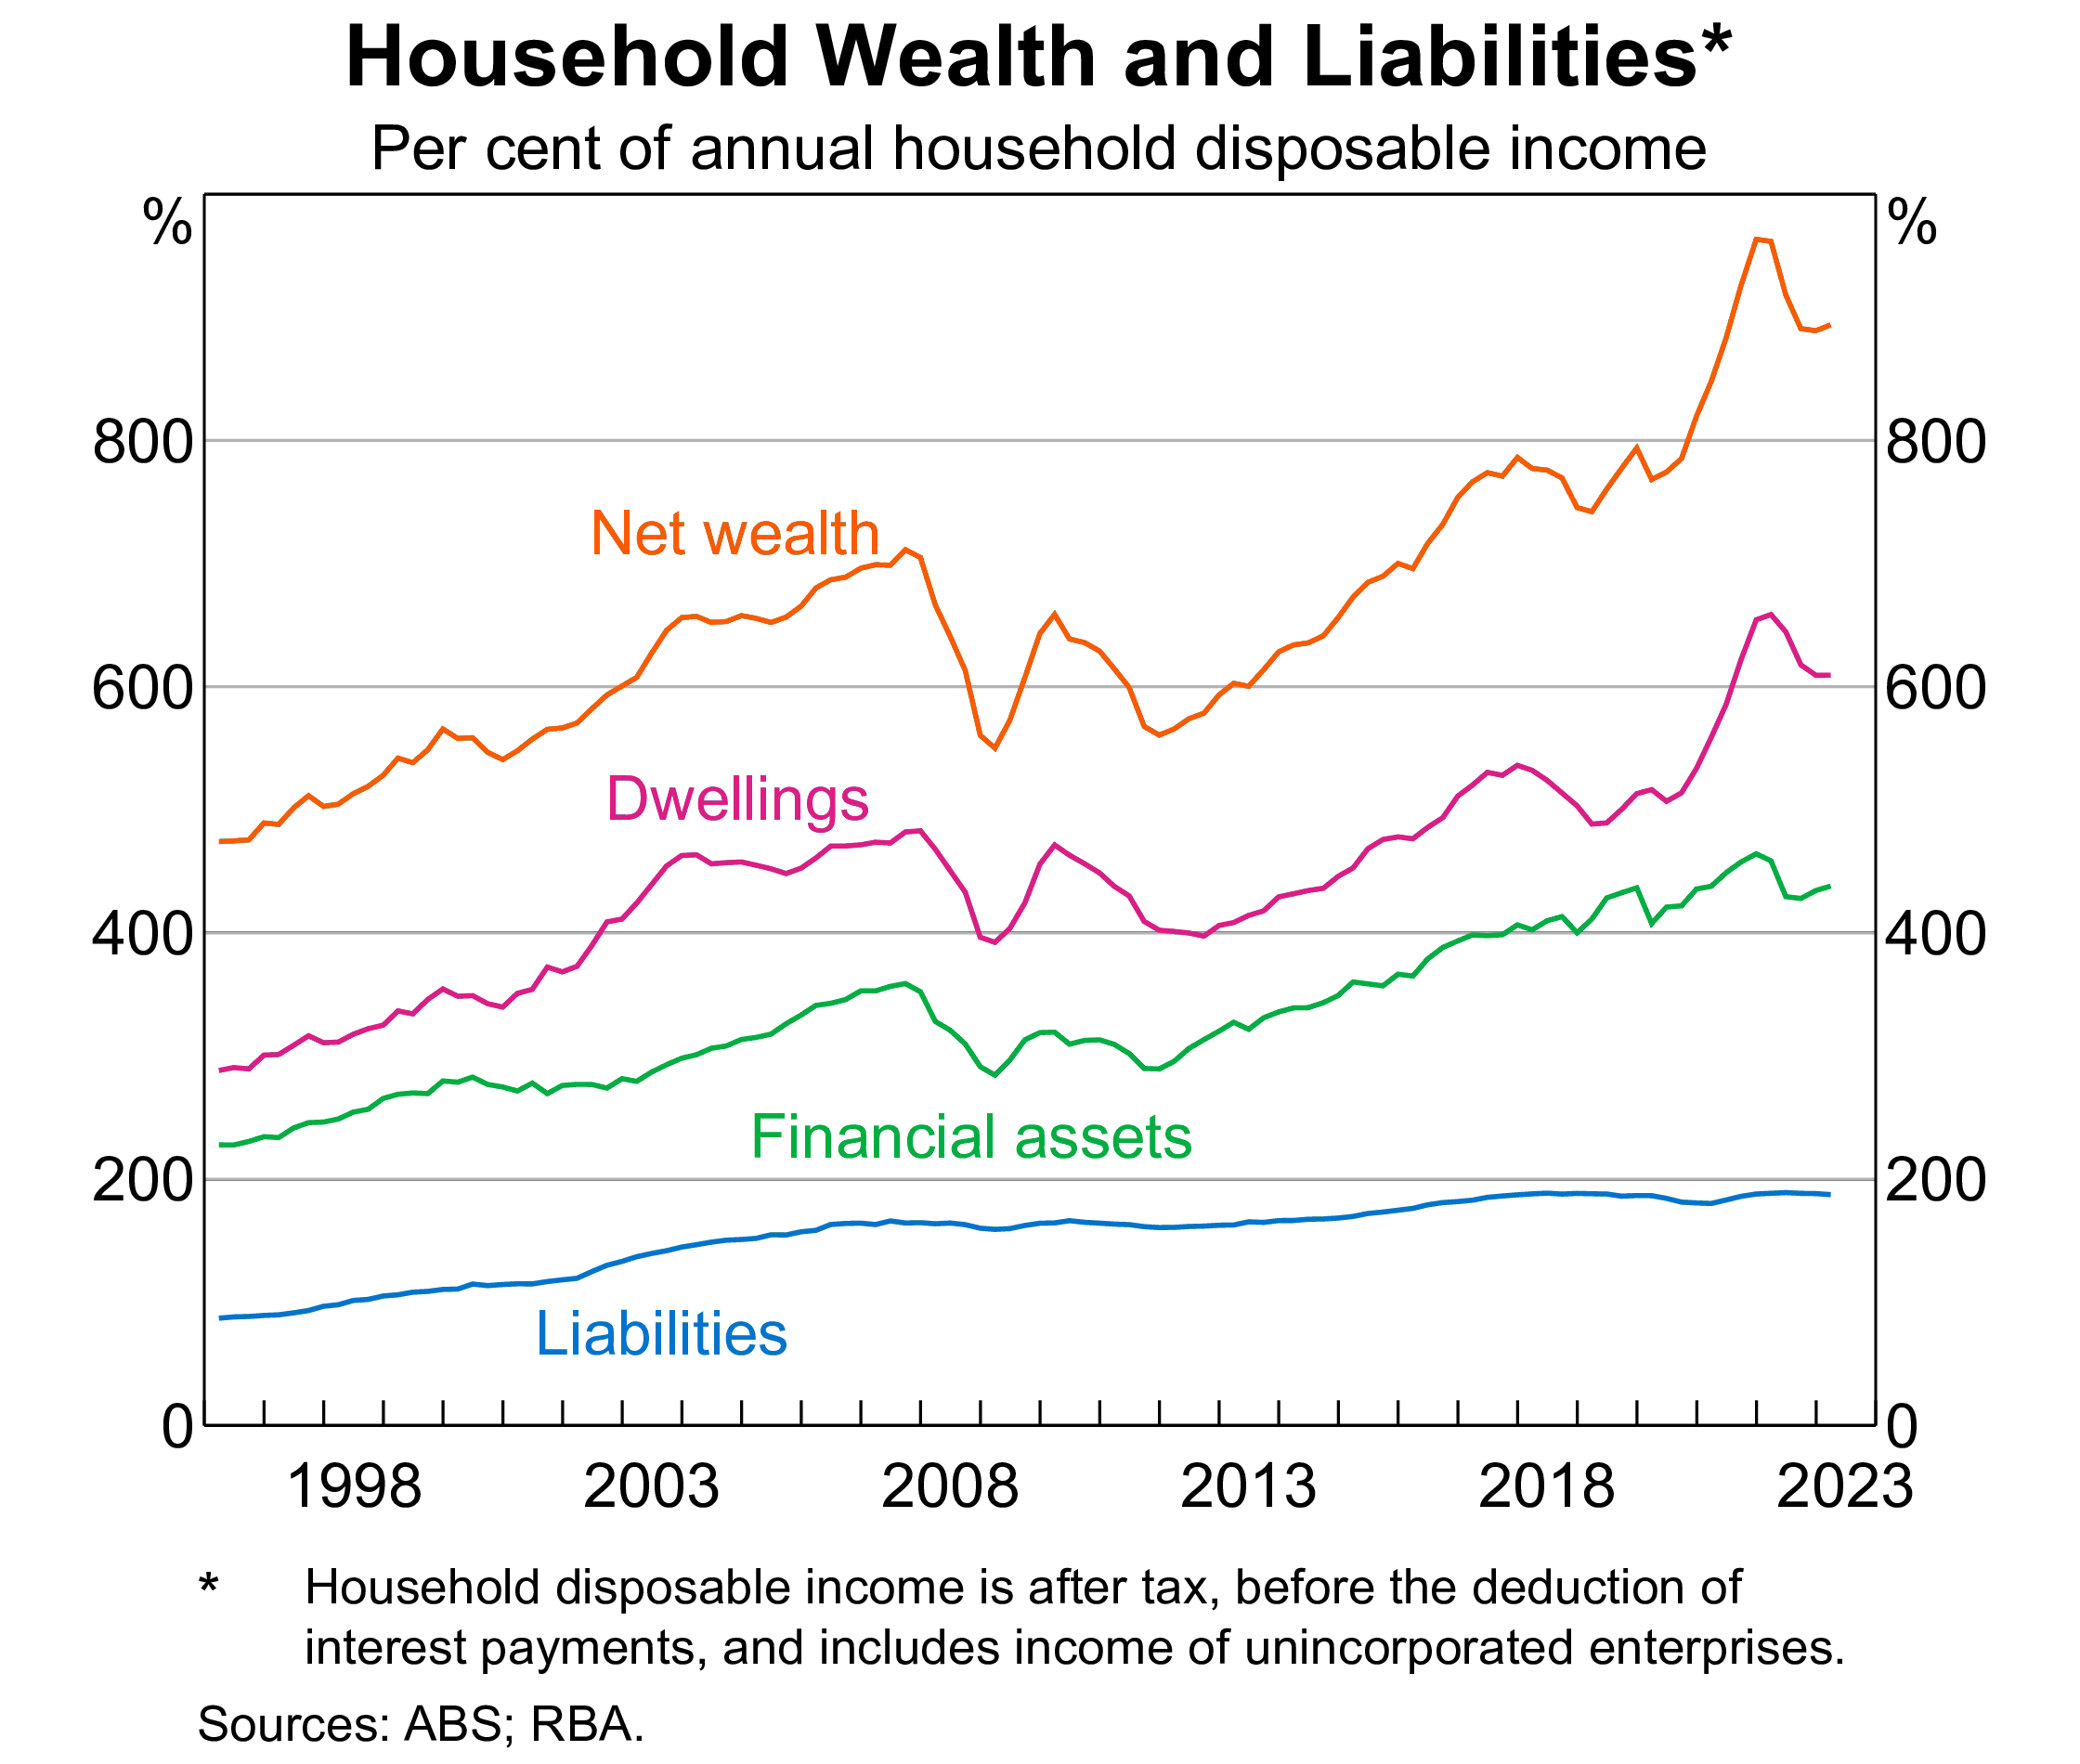 ABS: Household Net Wealth relative to Disposable Income